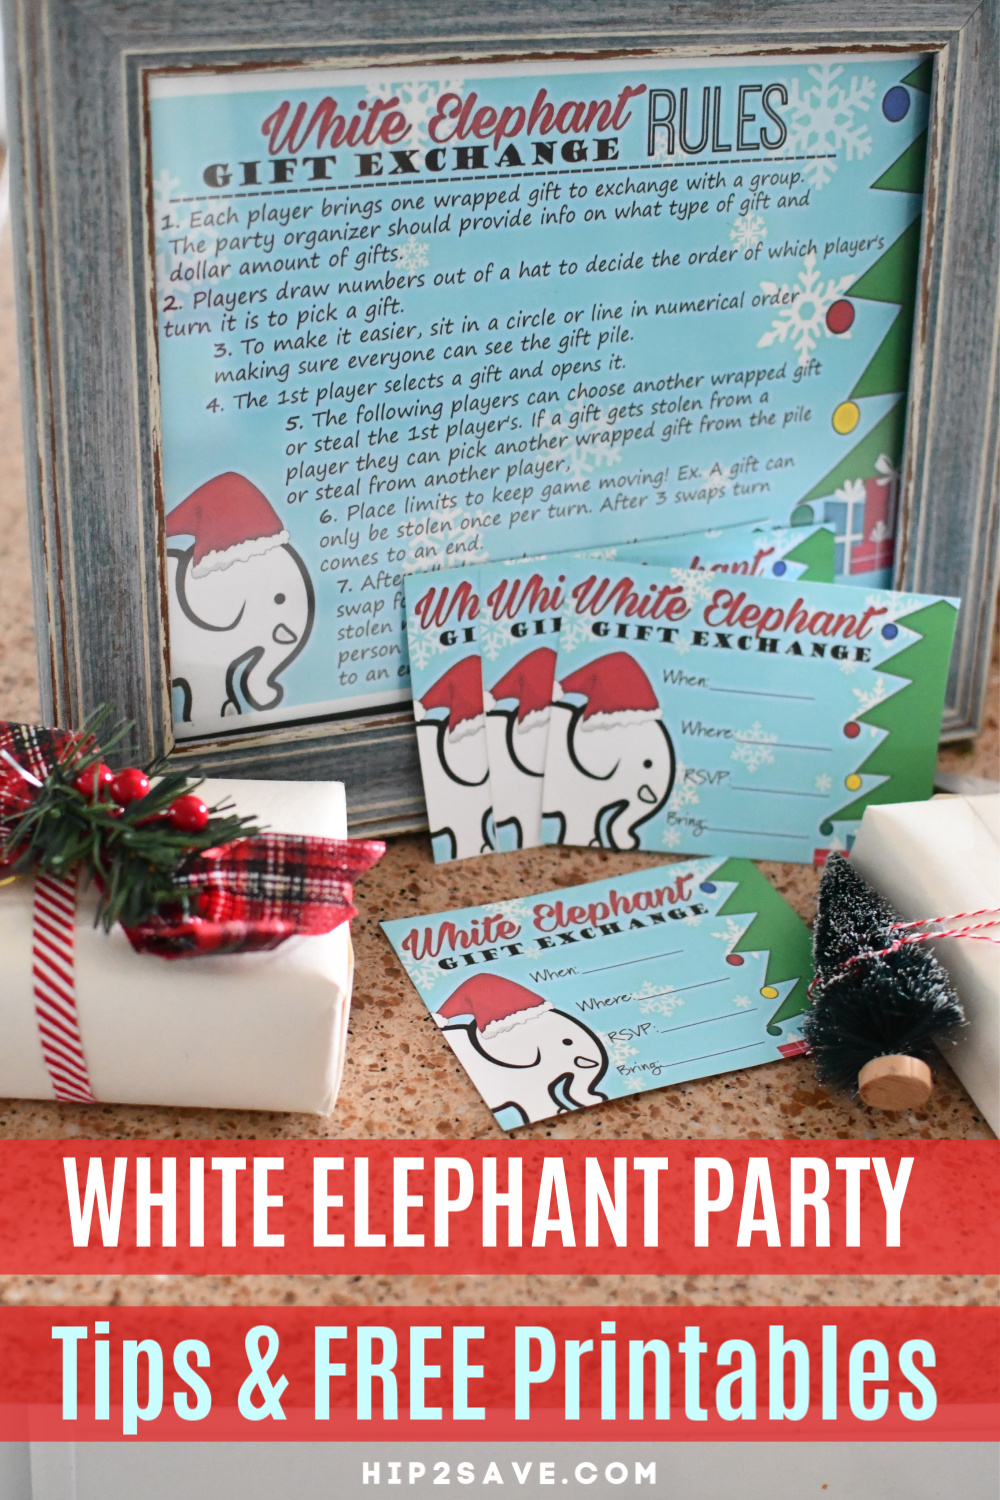 White Elephant Game Gift Exchange Rules & Free Printable Invitations